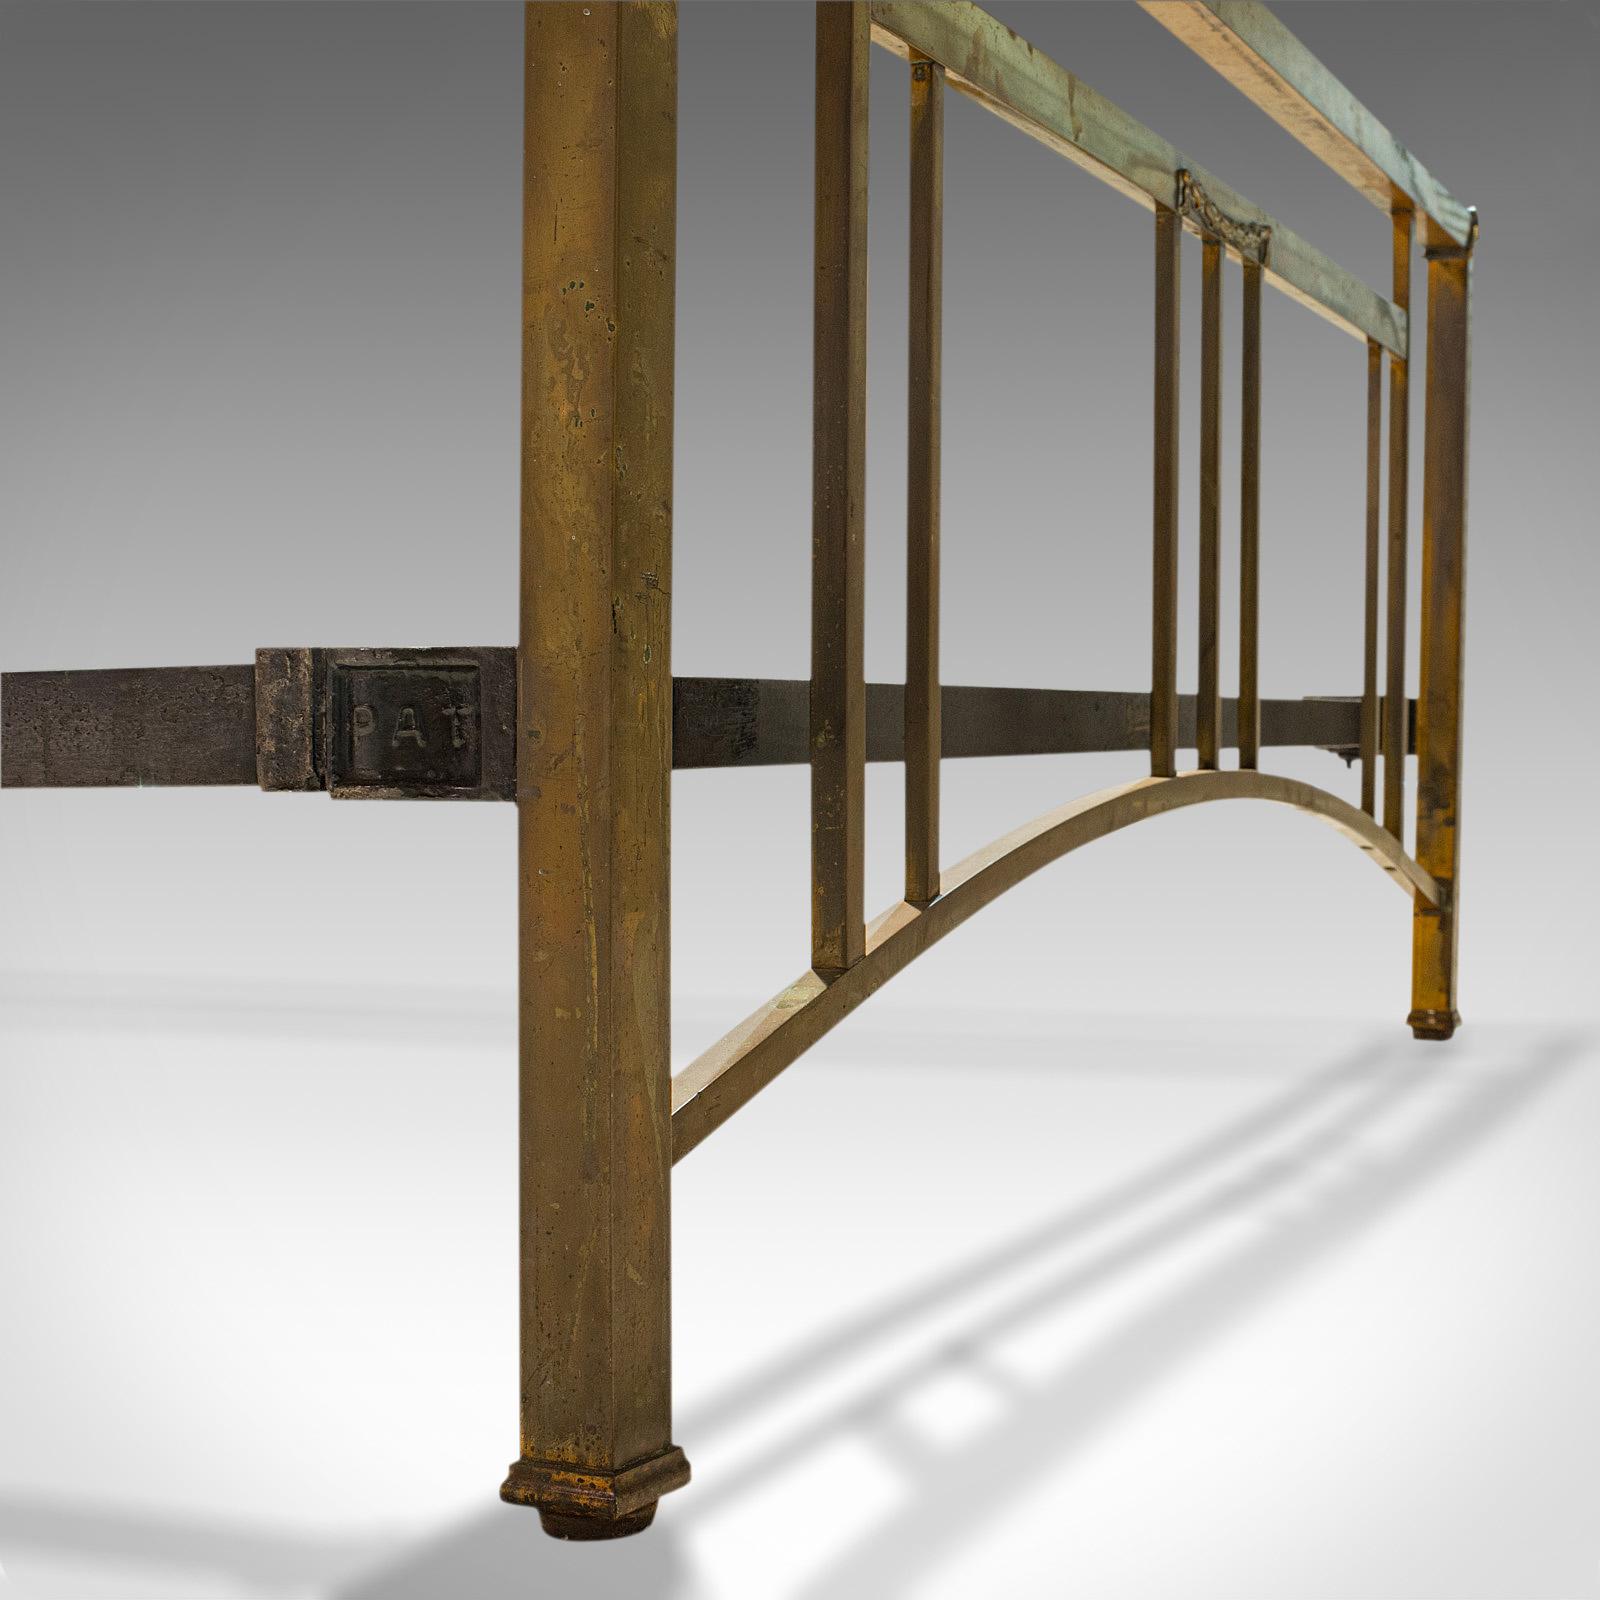 Antique Bed Frame, English, Brass, Iron, Double Bedstead, Victorian, circa 1880 2